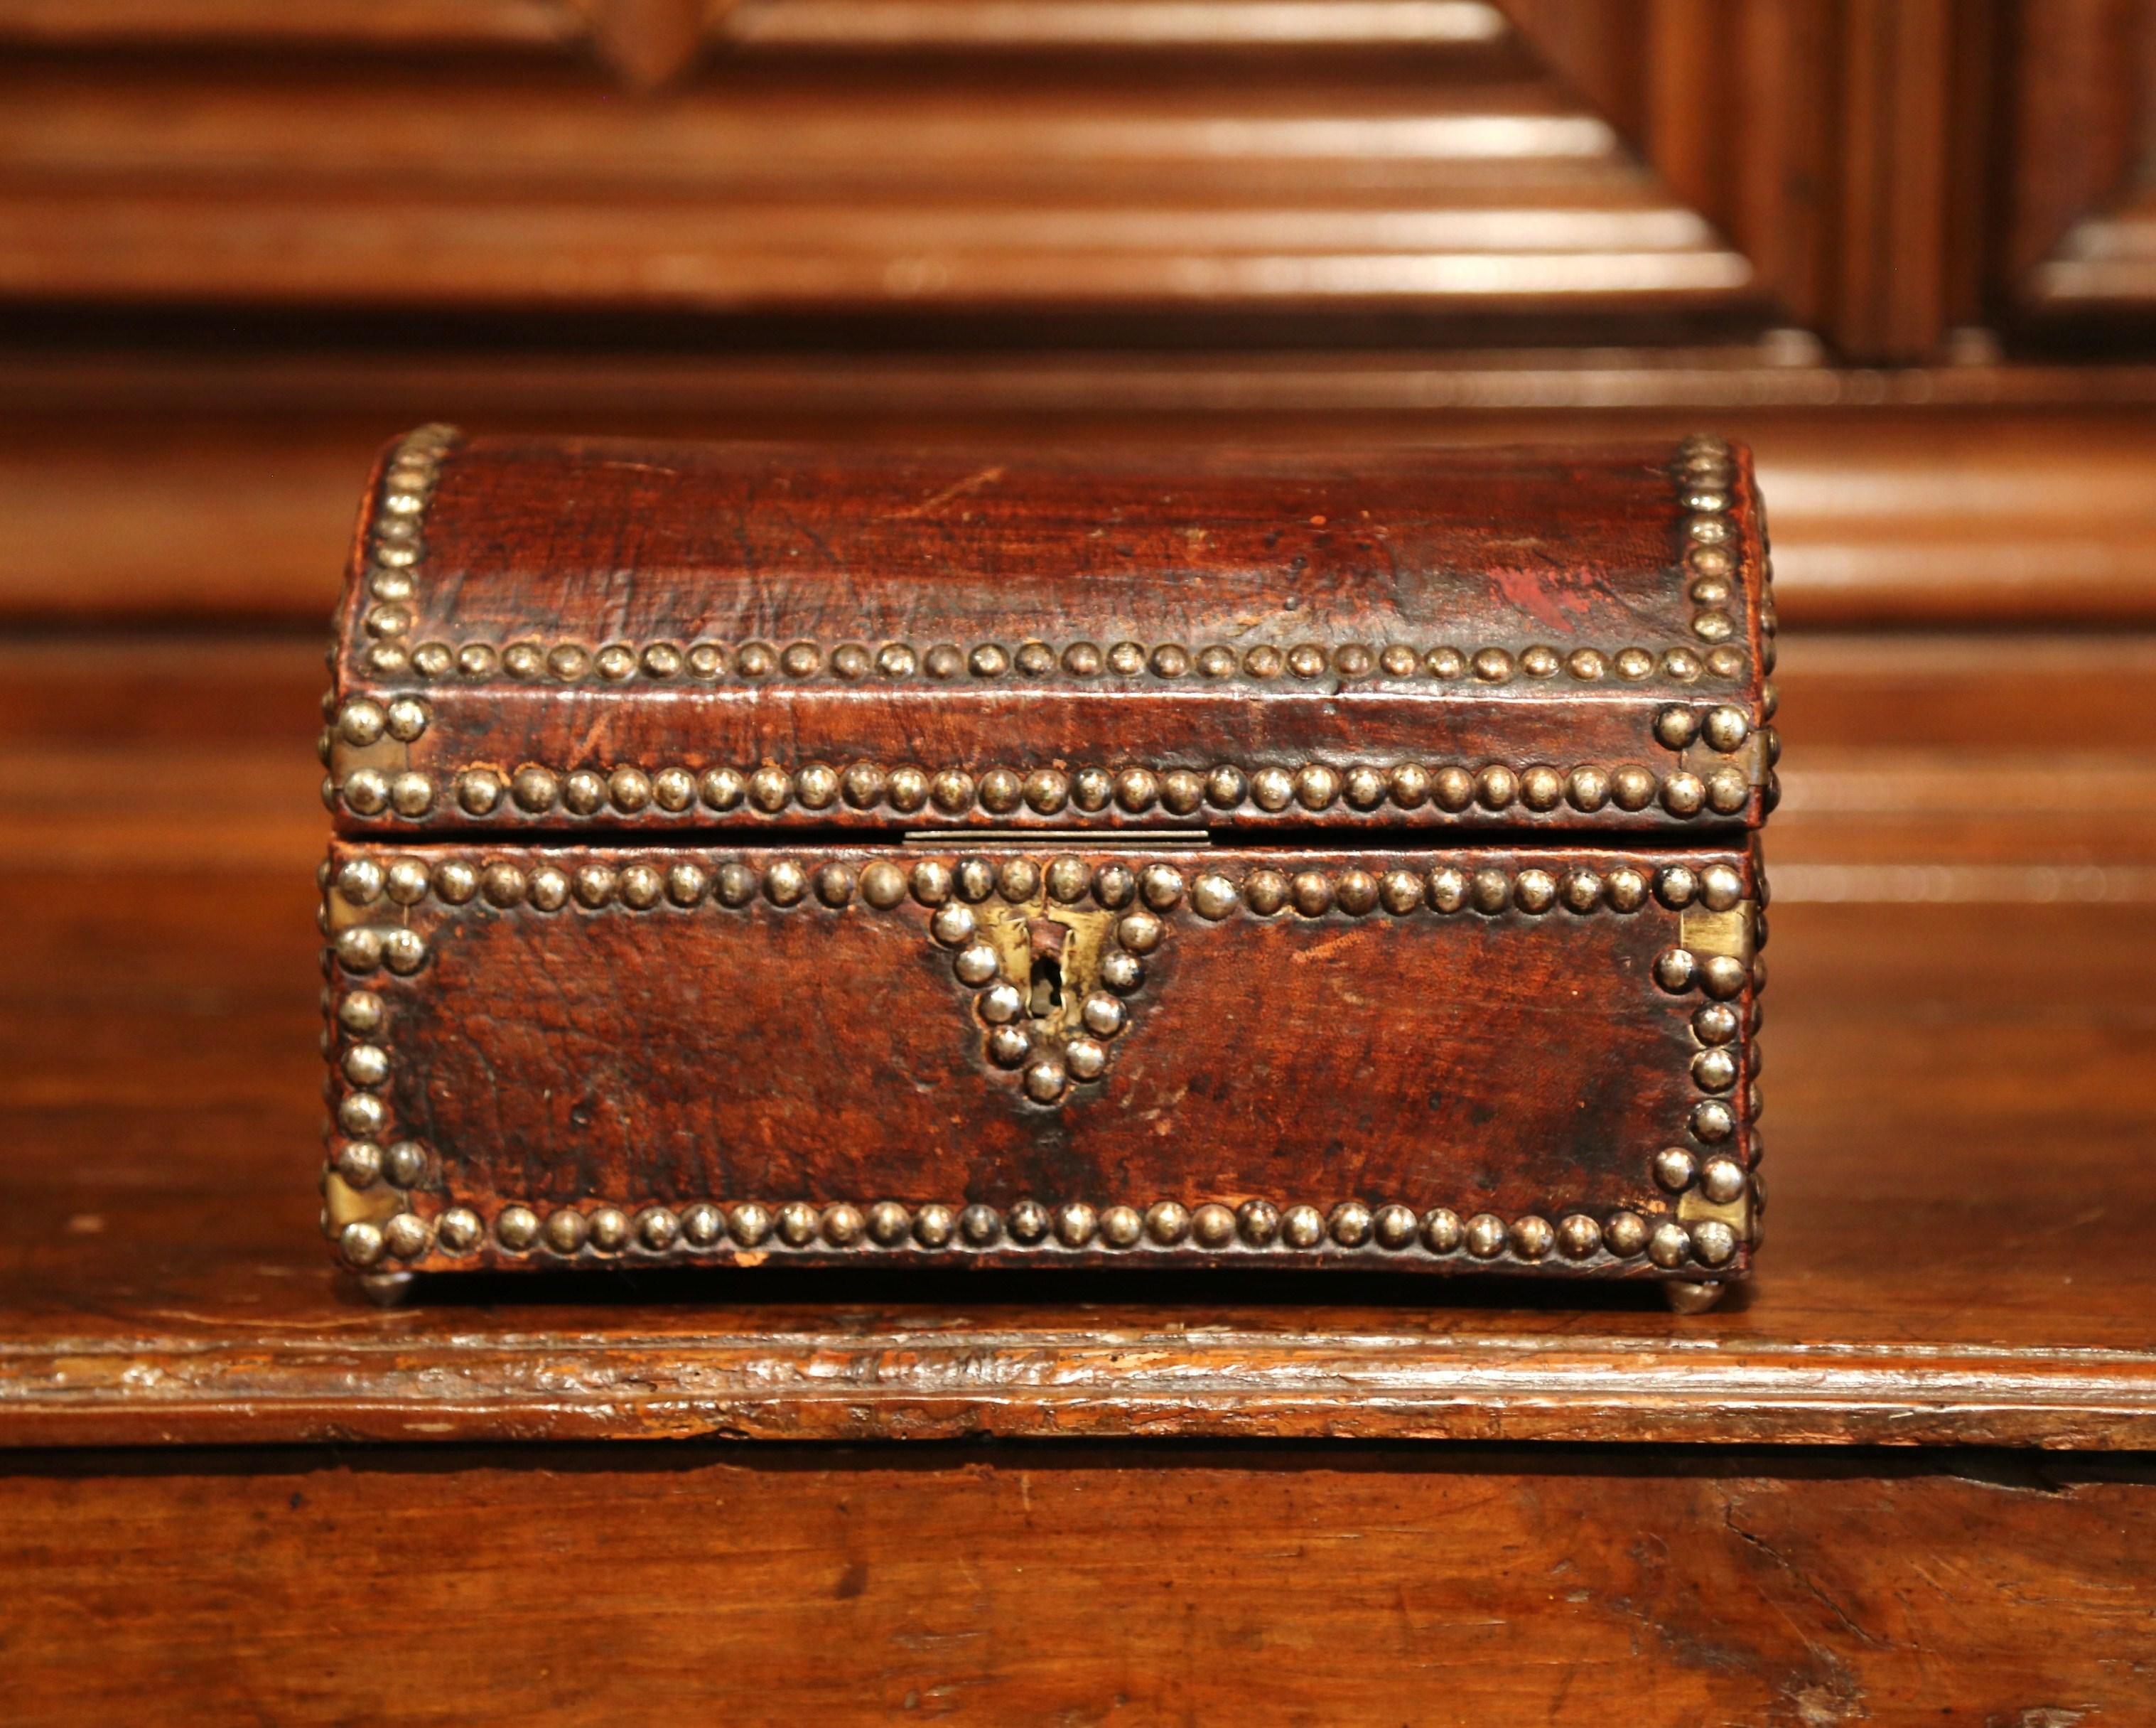 Decorate a shelf or a desk with this beautiful antique trunk from southern France; crafted circa 1850, the brown leather box sits on four round brass feet, and is shaped like a classic storage trunk with an arched top and a rectangular front and